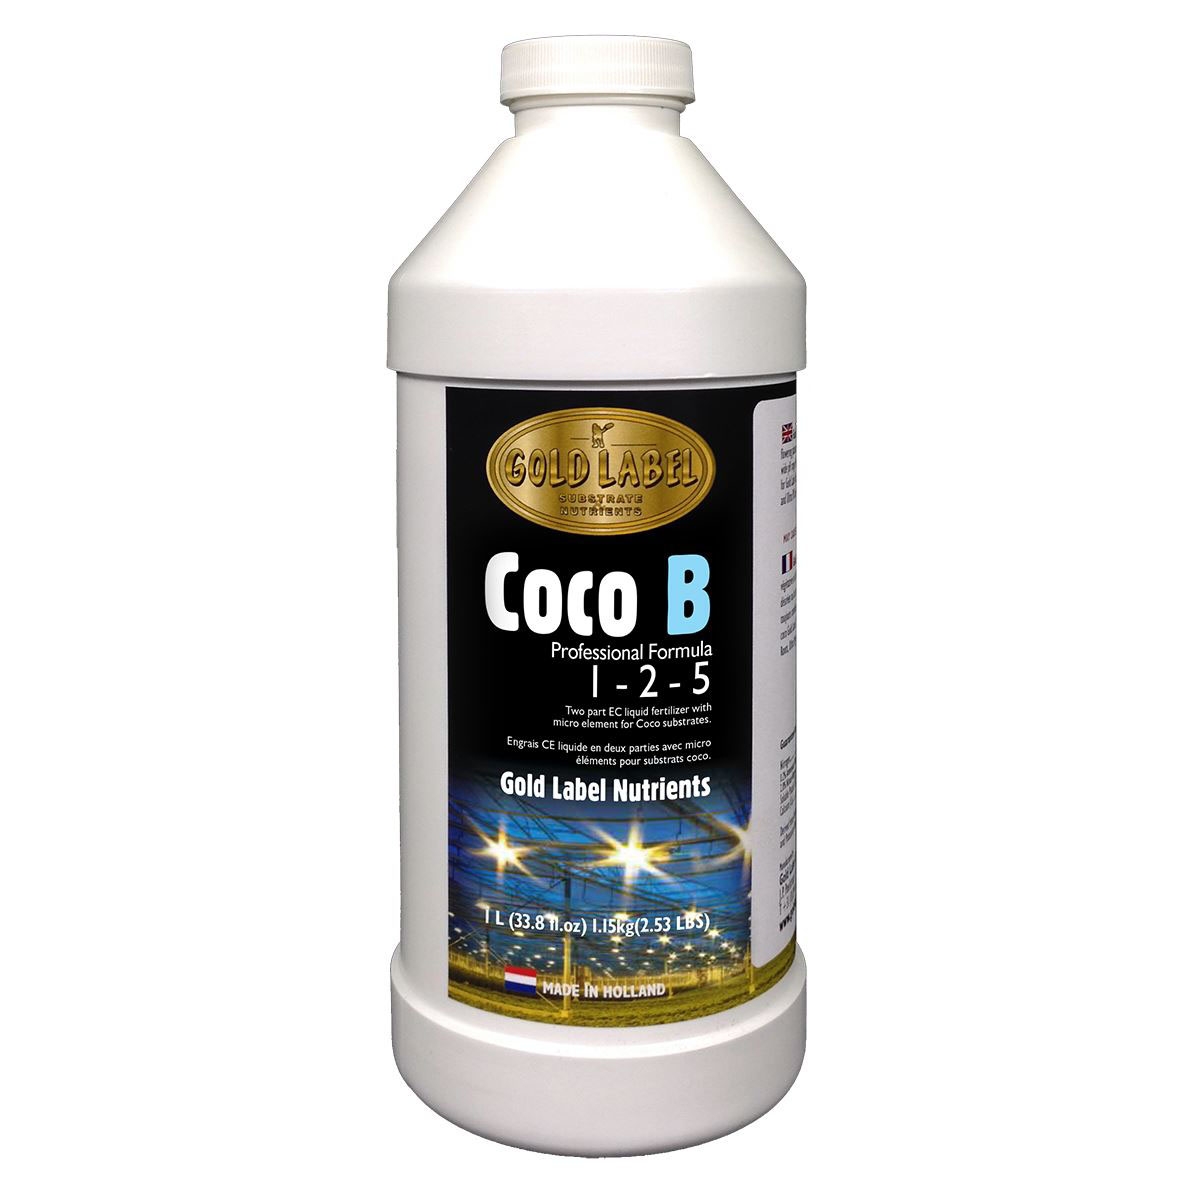 Coco B by Gold Label